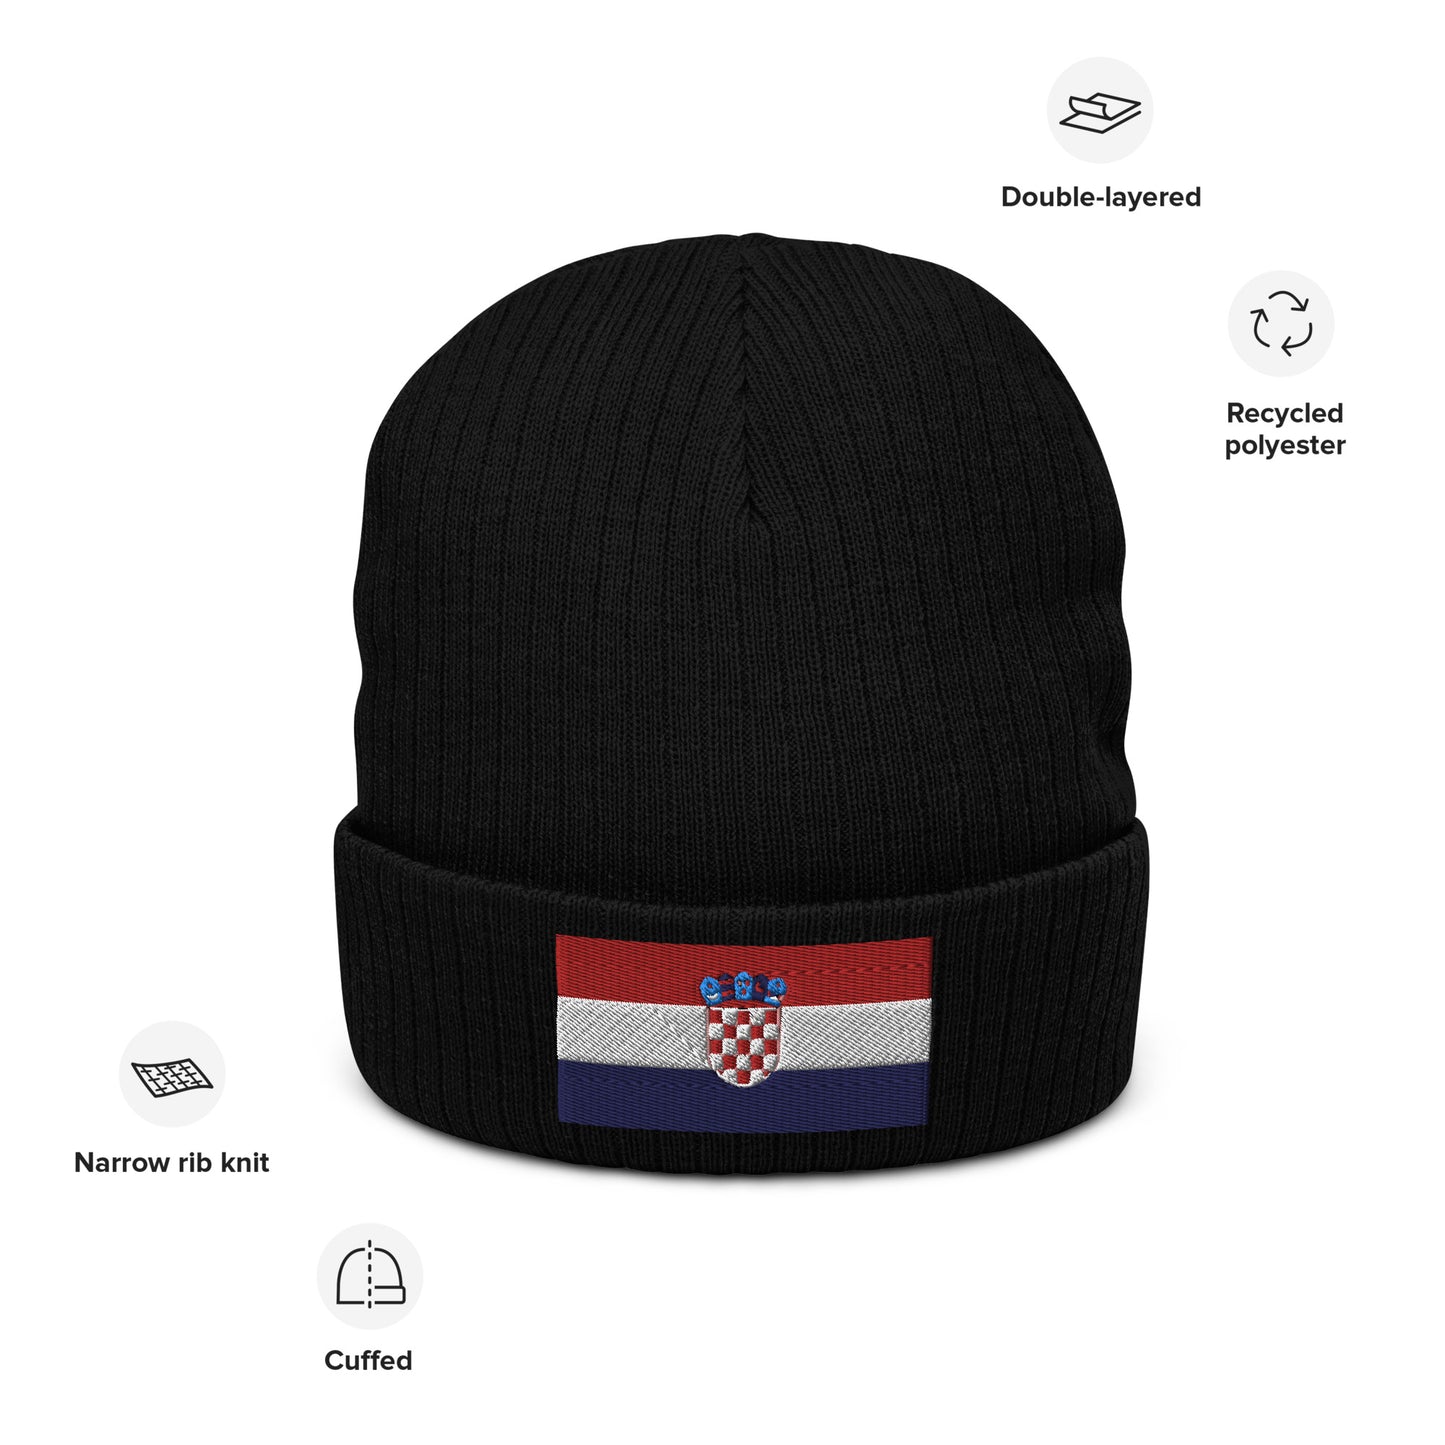 Premium Quality Croatia Beanie / Ribbed Knit Beanie With Embroidered Flag From Croatia / 8 colors / Recycled Polyester